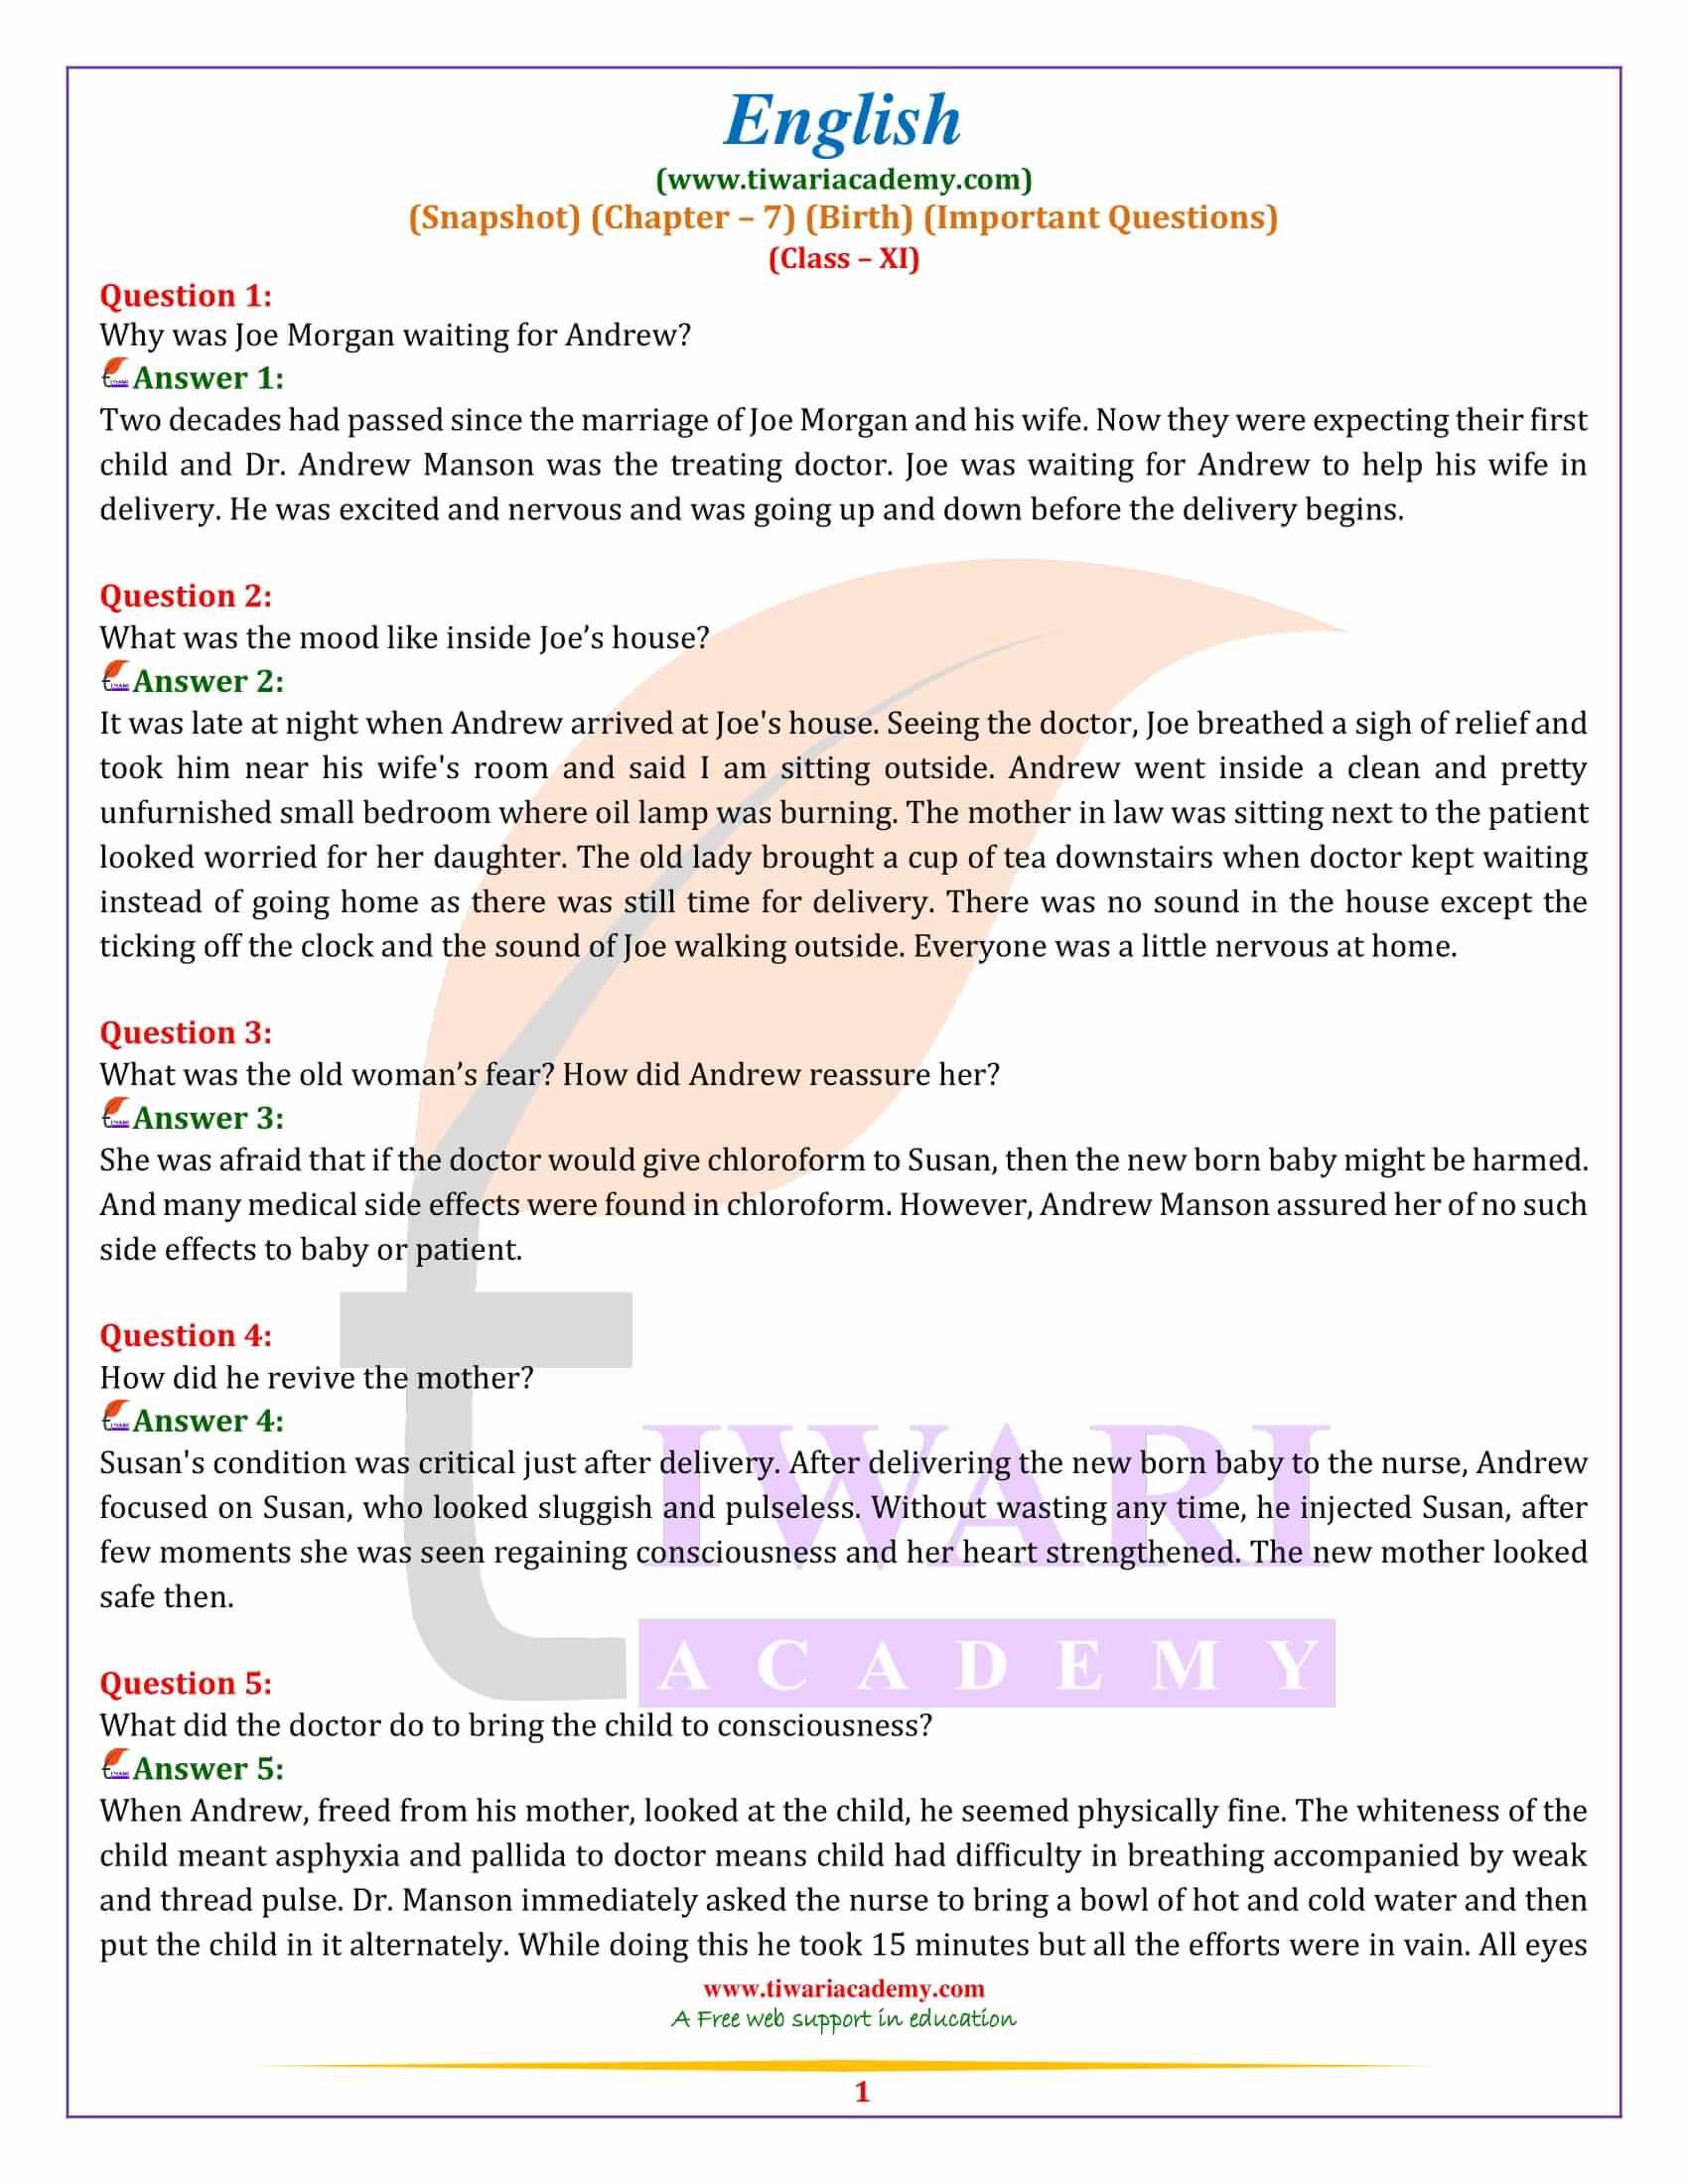 Class 11 English Snapshots Chapter 7 Practice Questions